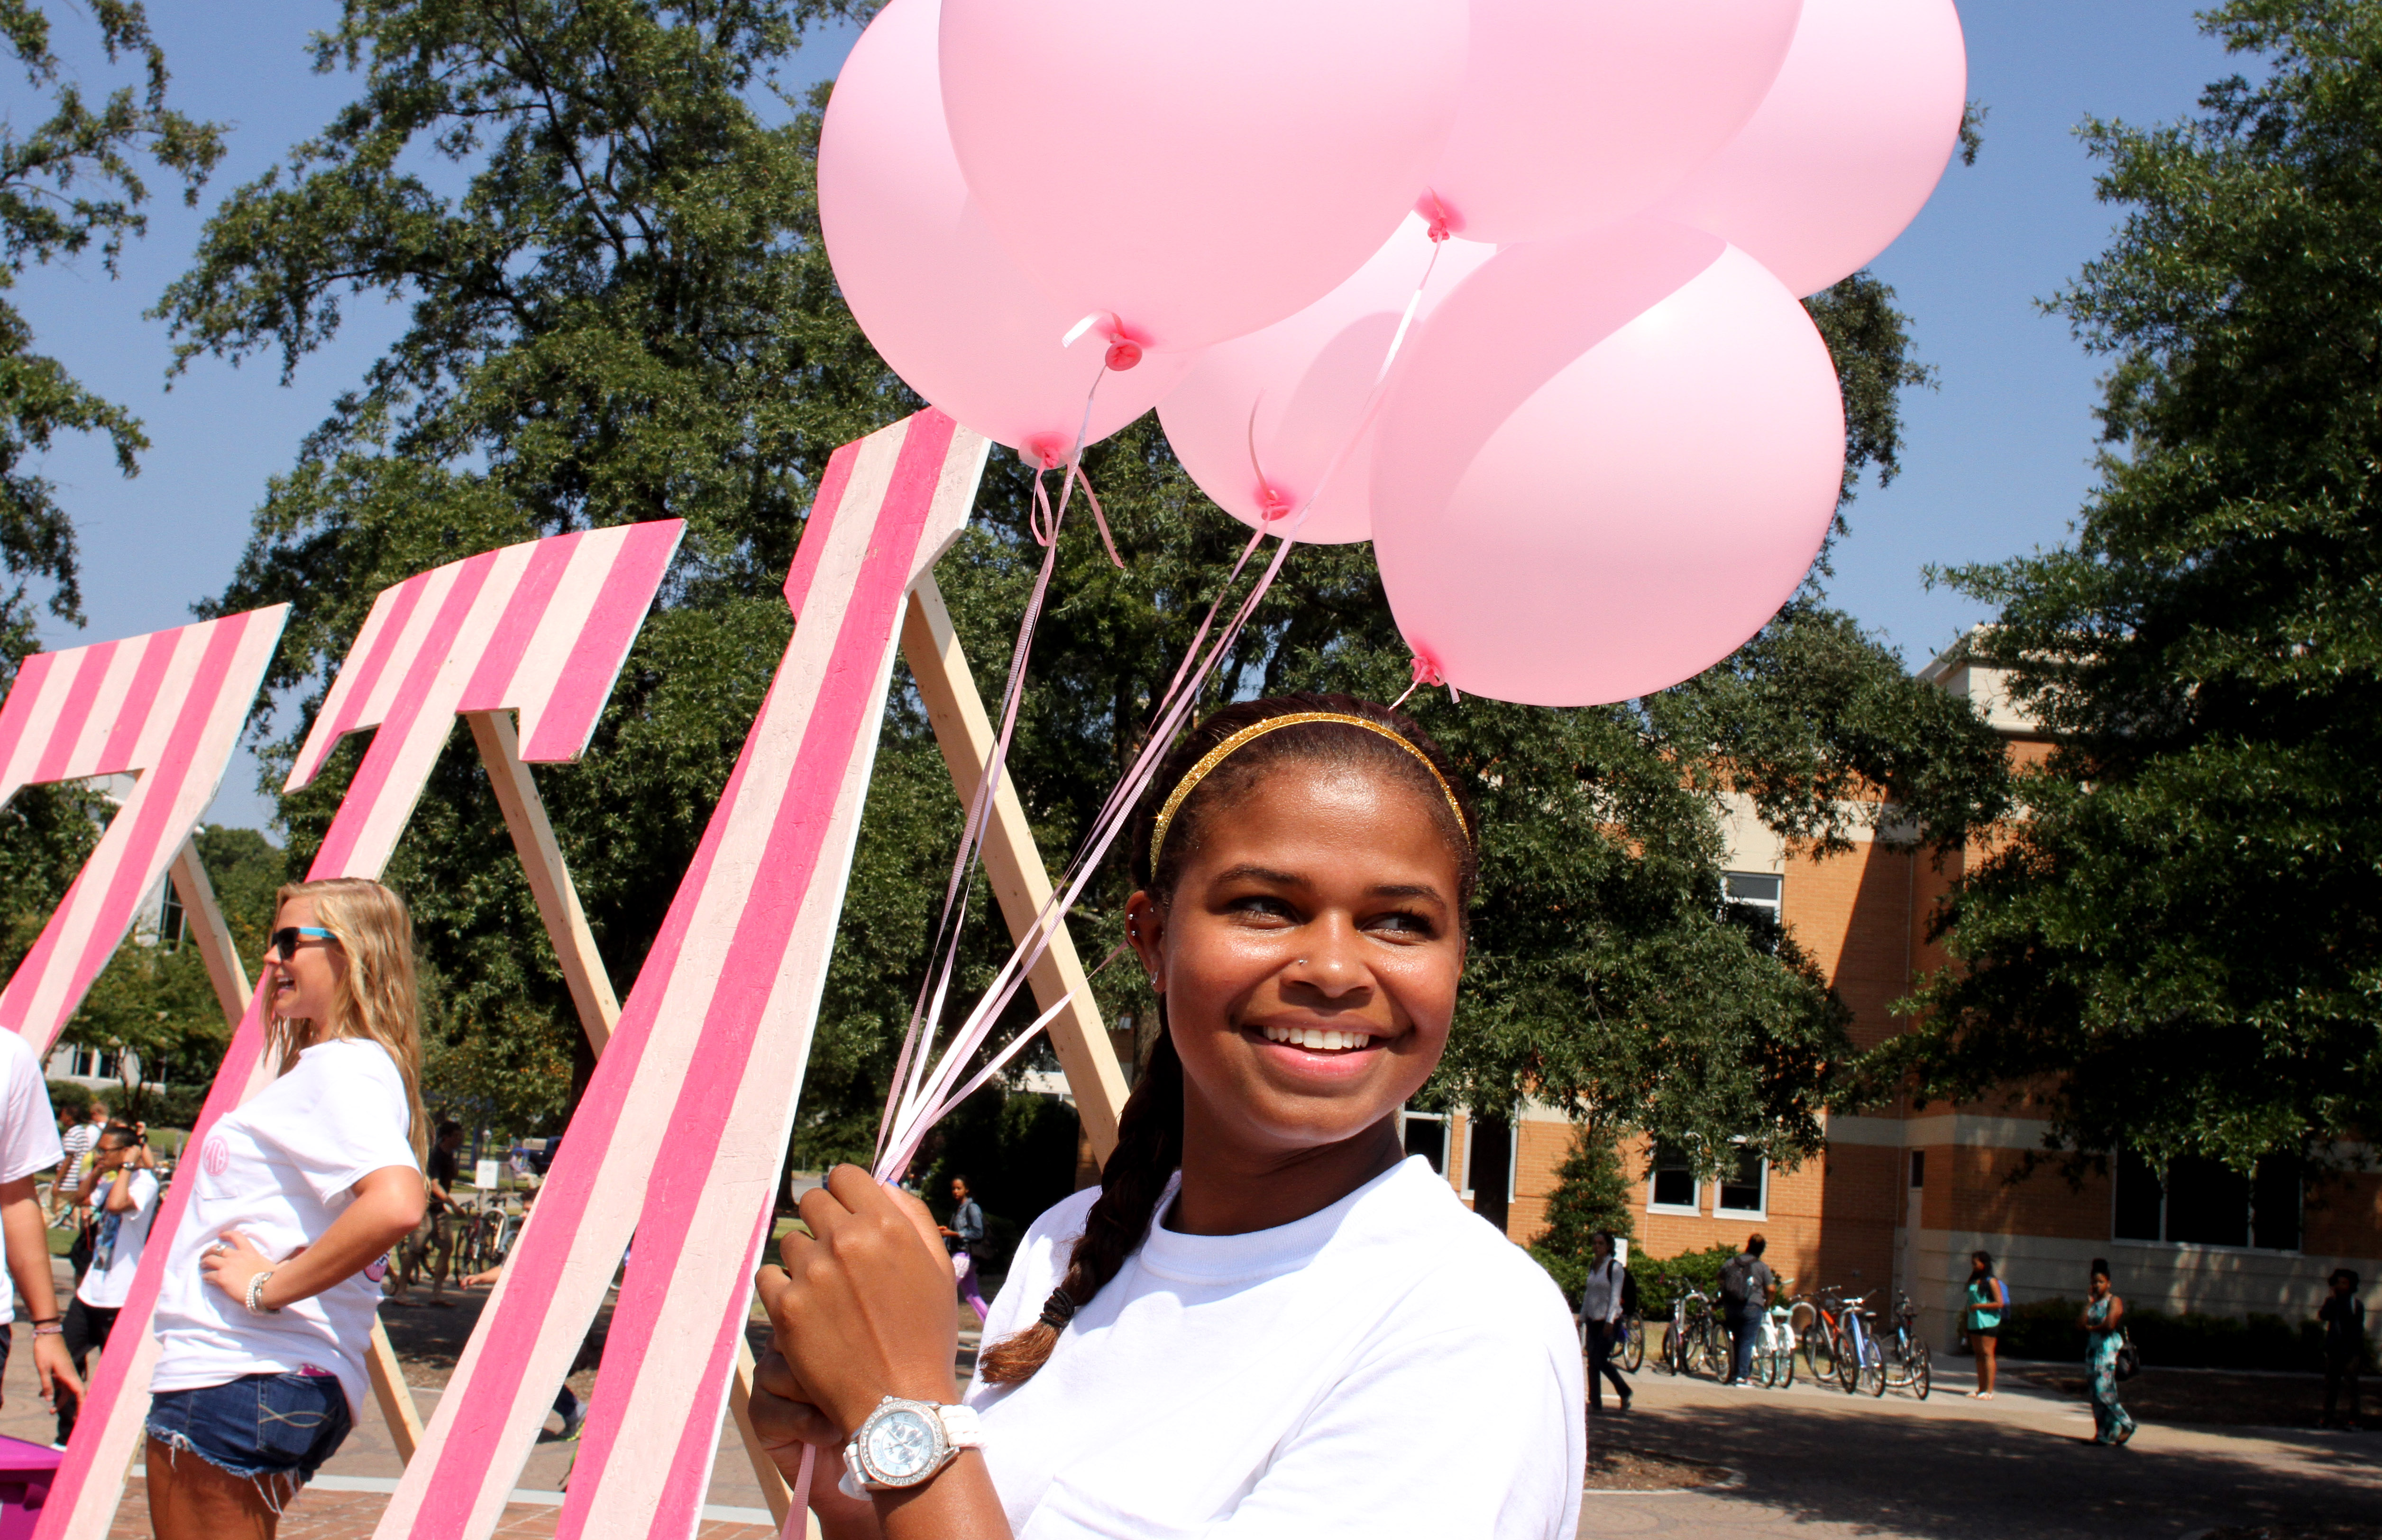 ZTA member Rachel Bryant, a sophomore psychology/human services major, helped decorate for the rally with pink balloons.